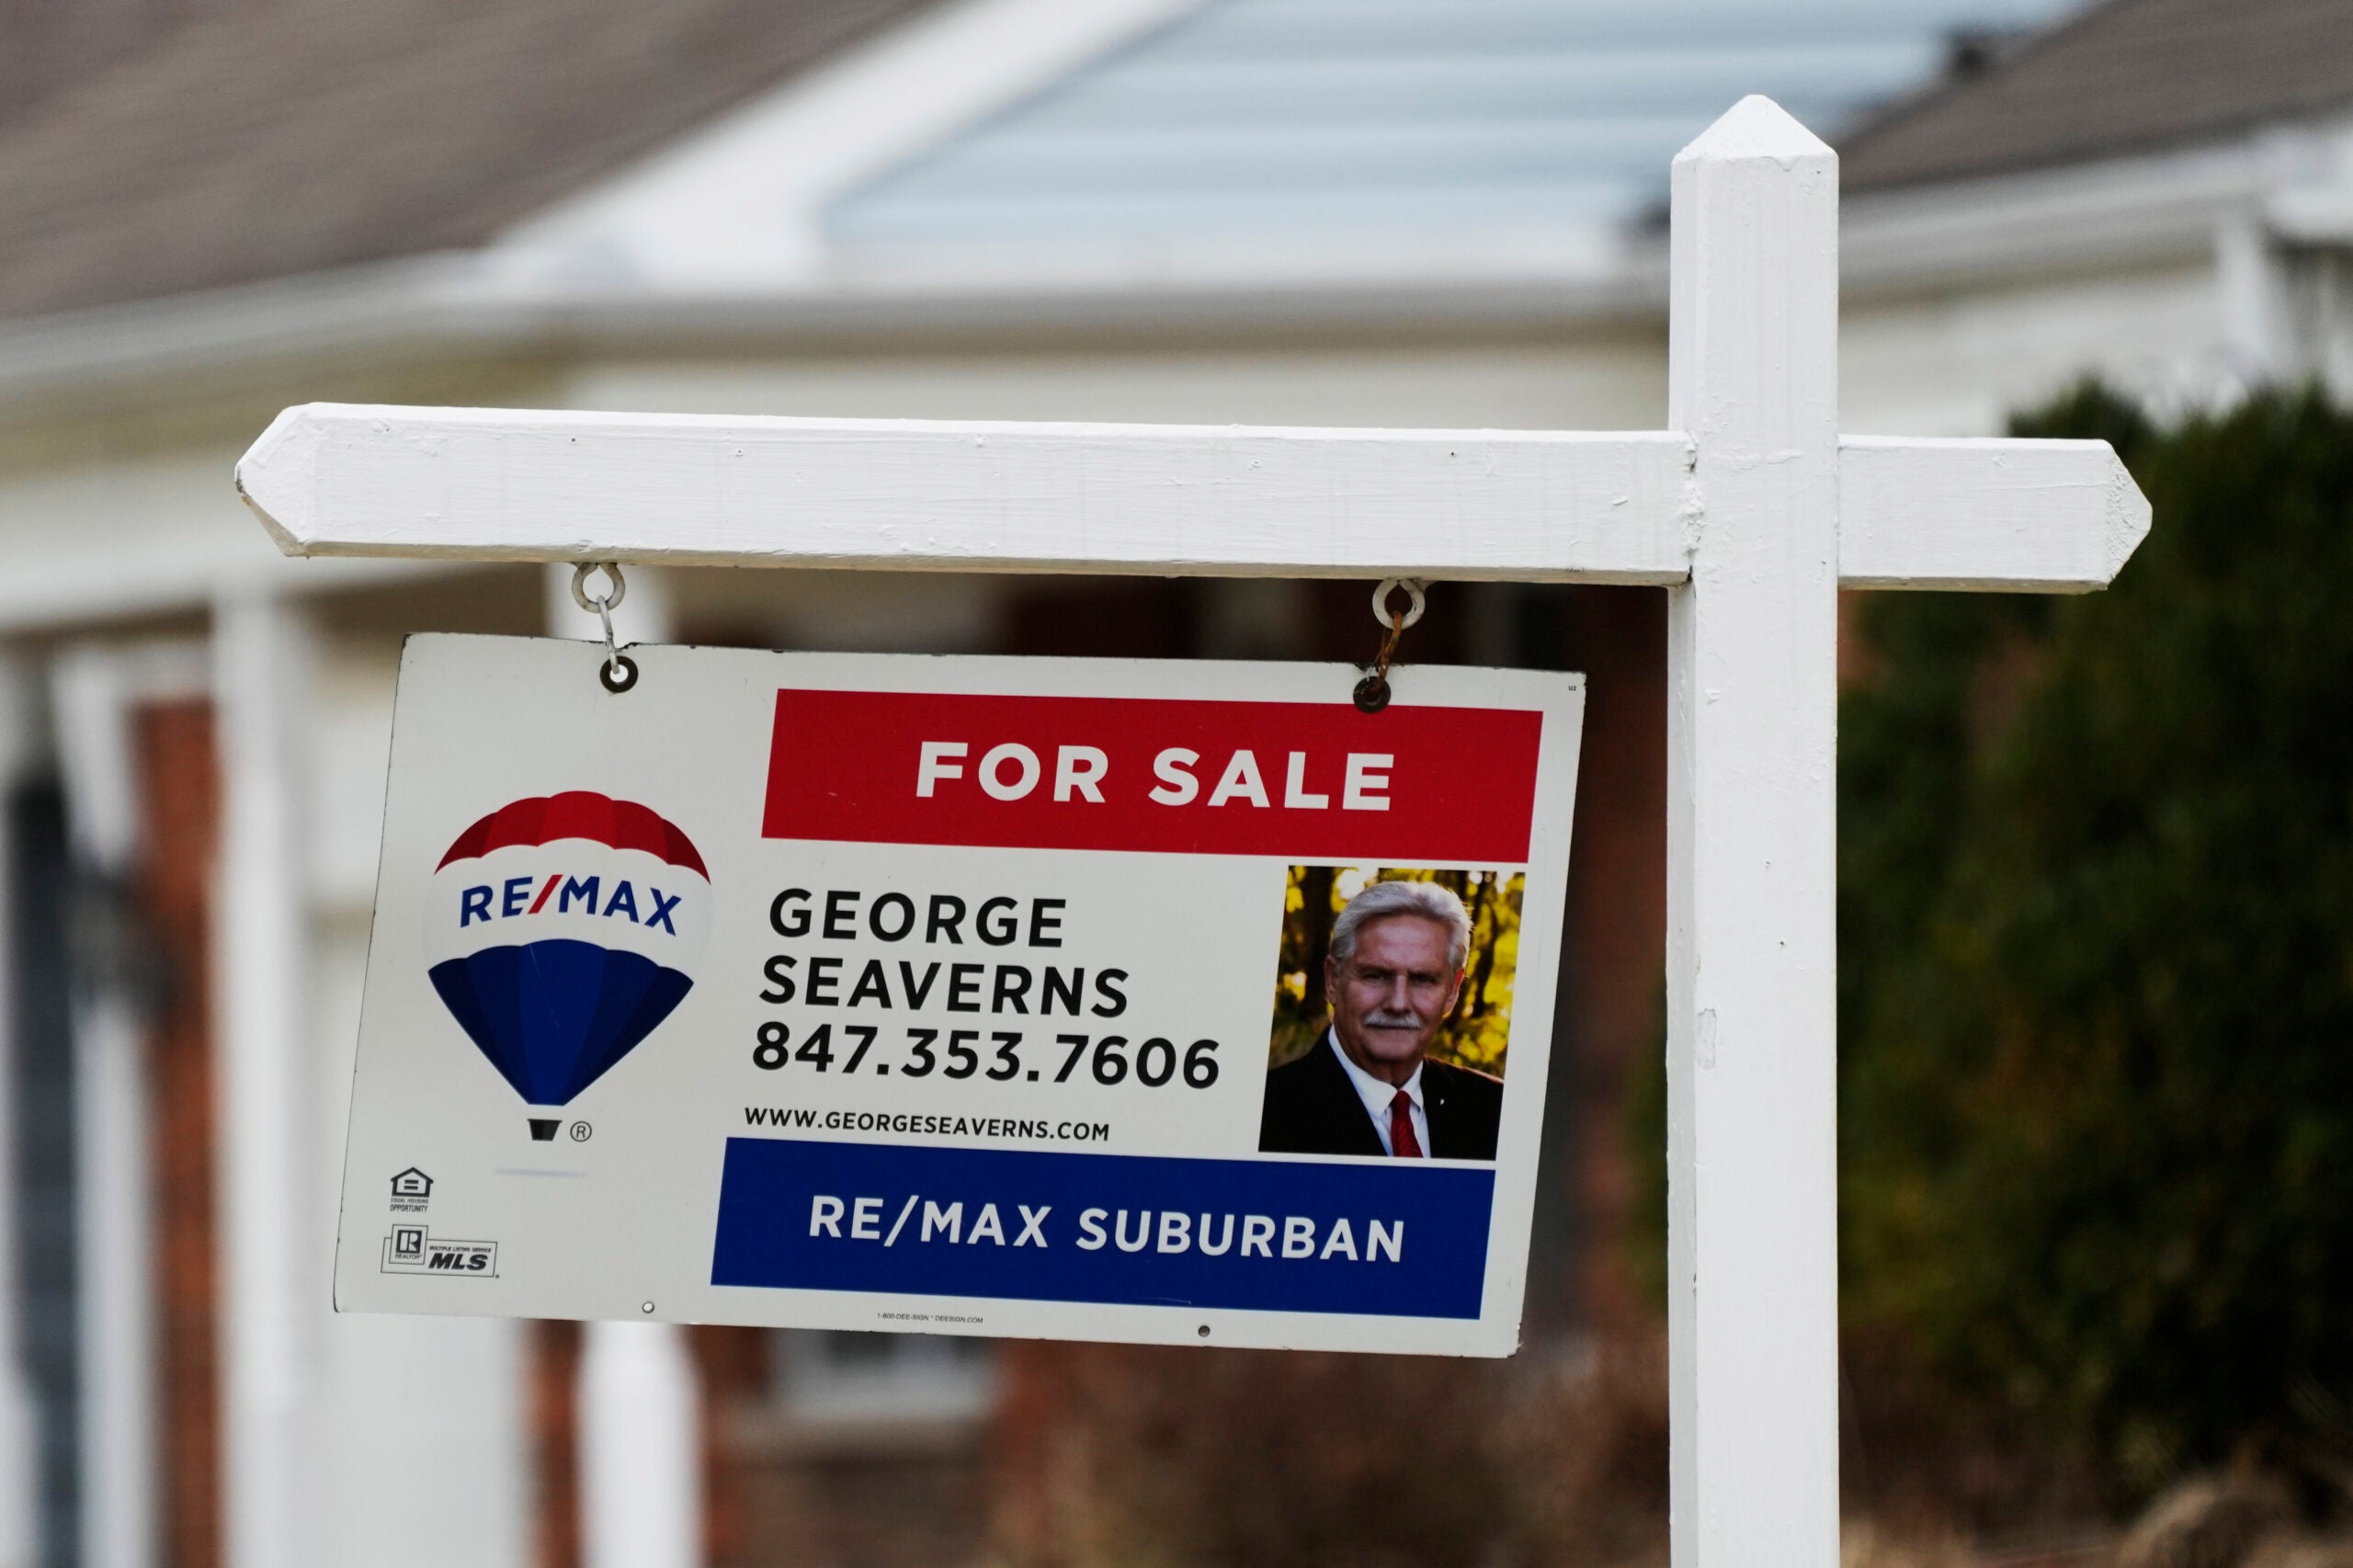 A photo of a RE/Max for-sale sign is used to illustrate a story on the average long-term U.S. mortgage rate.